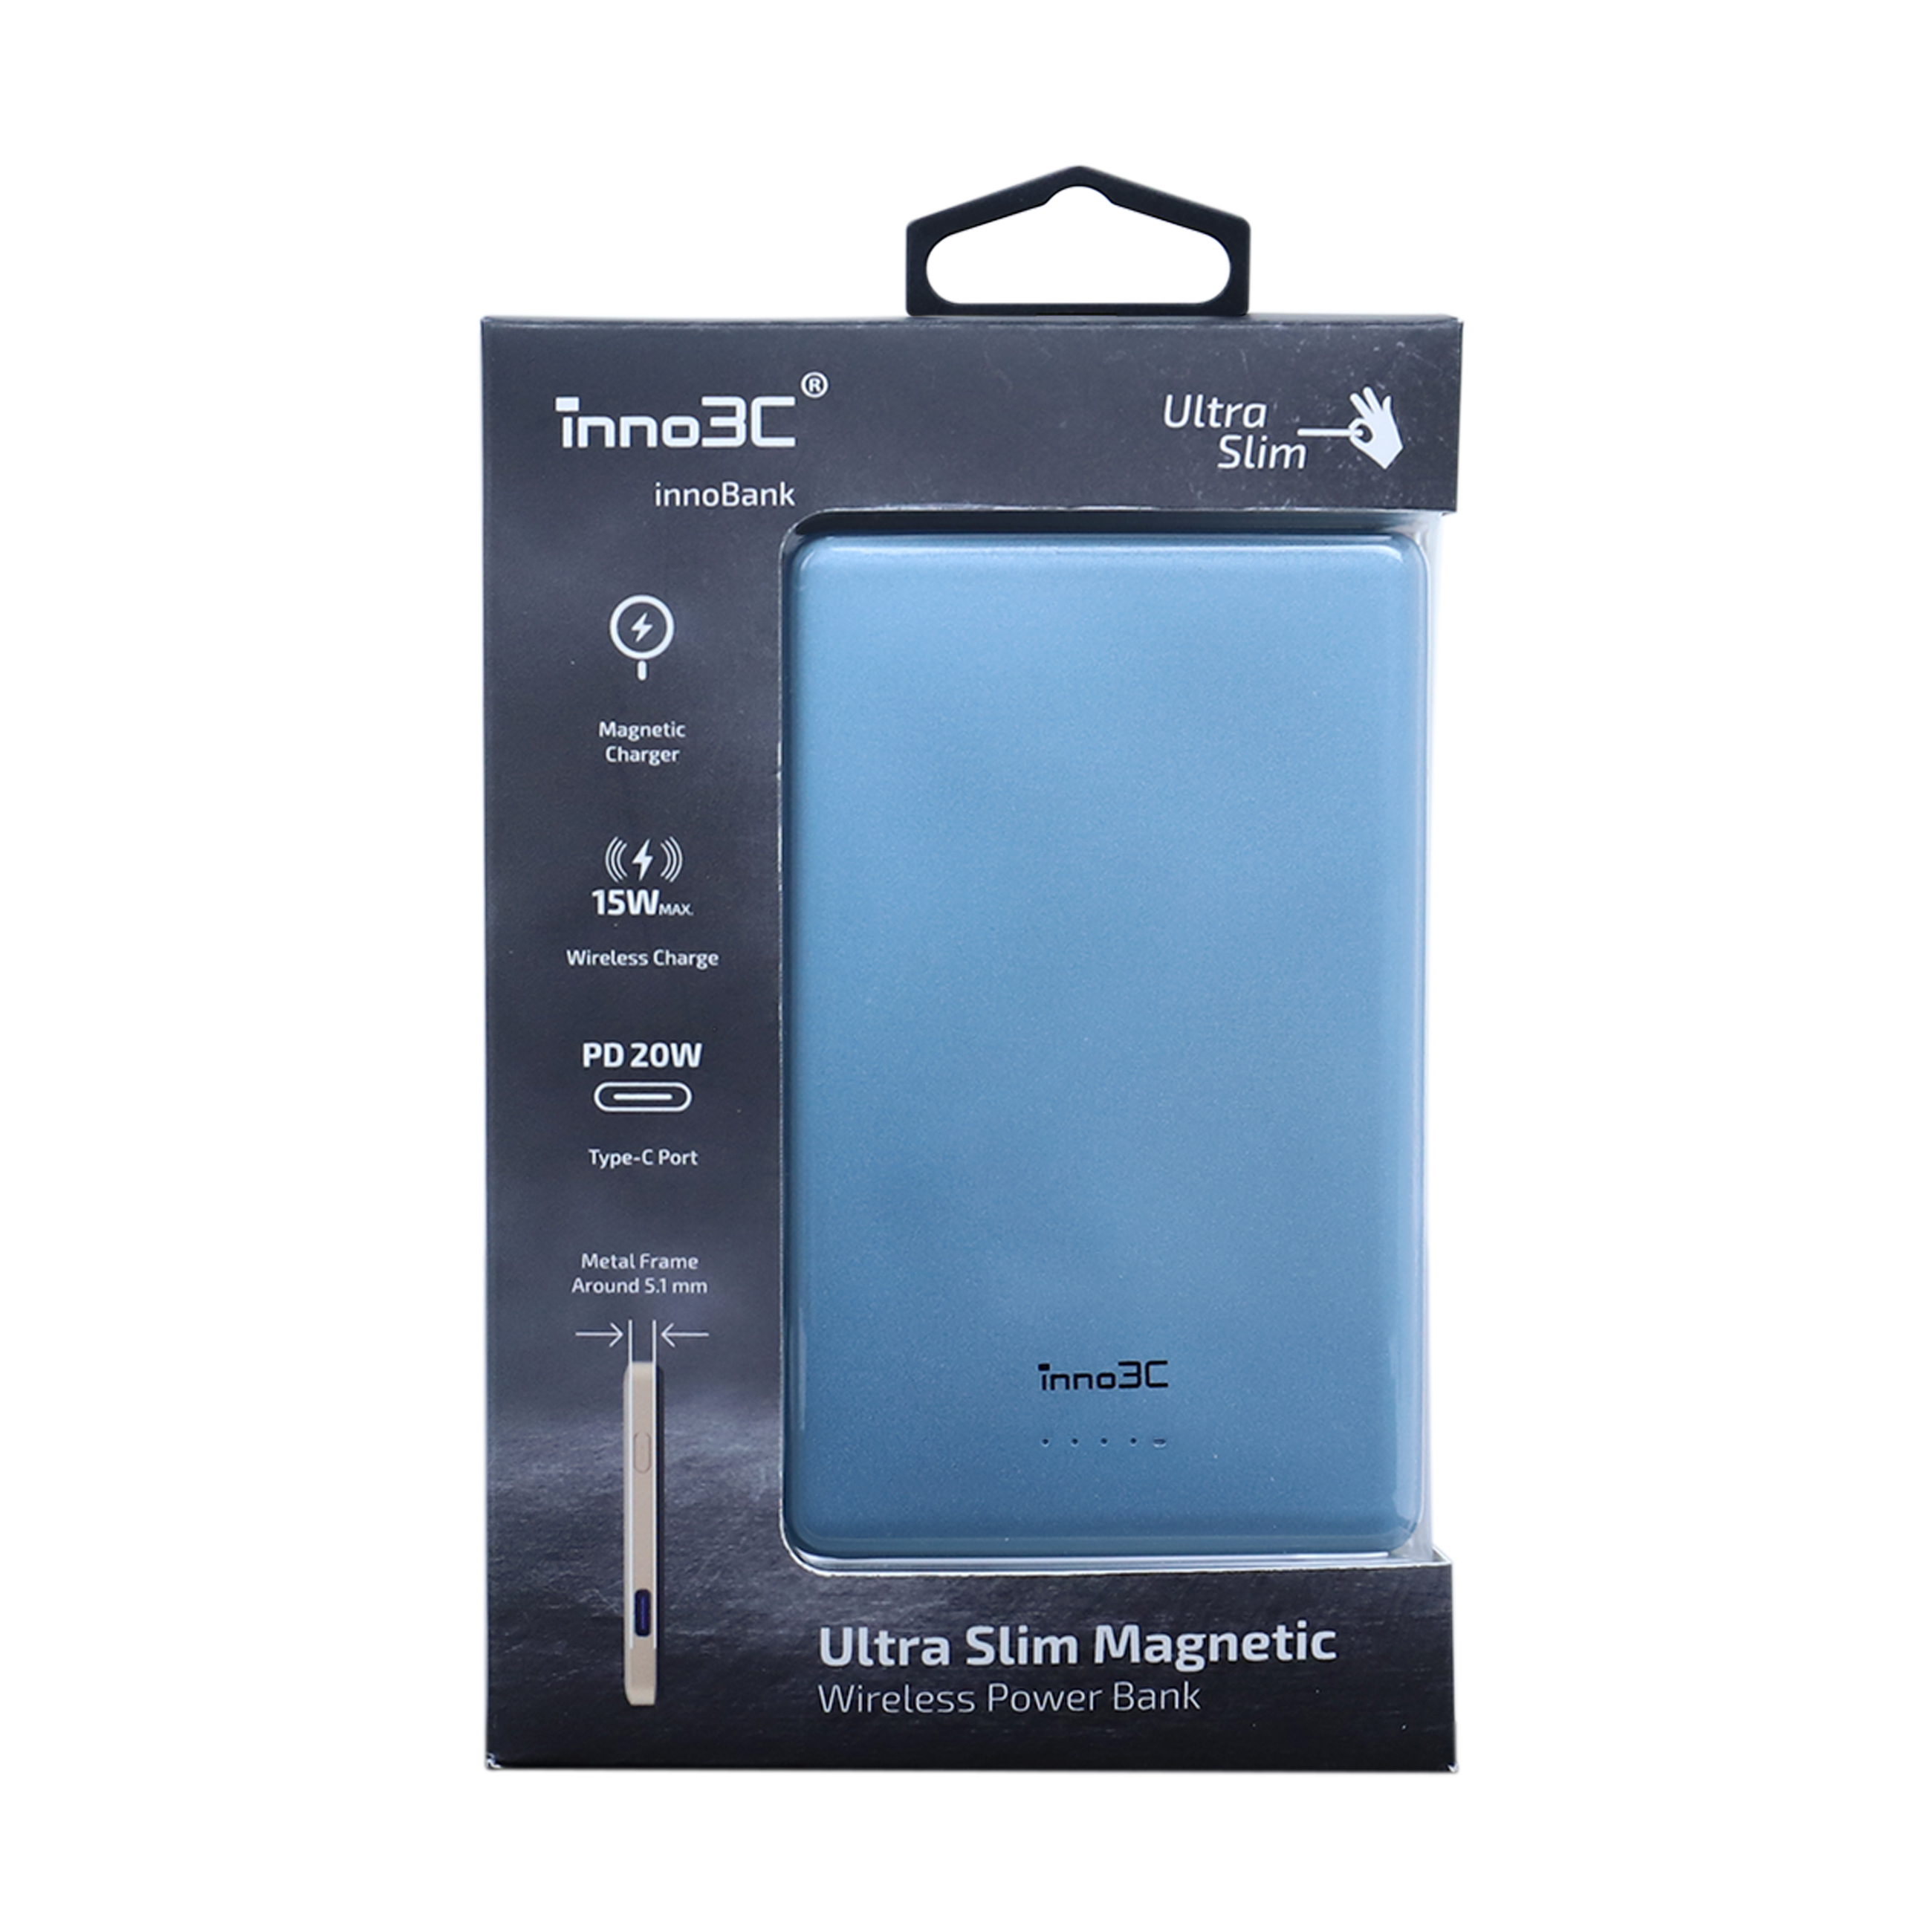 inno3C i-ST5 Ultra Slim Magnetic Wireless Power Bank, , large image number 4